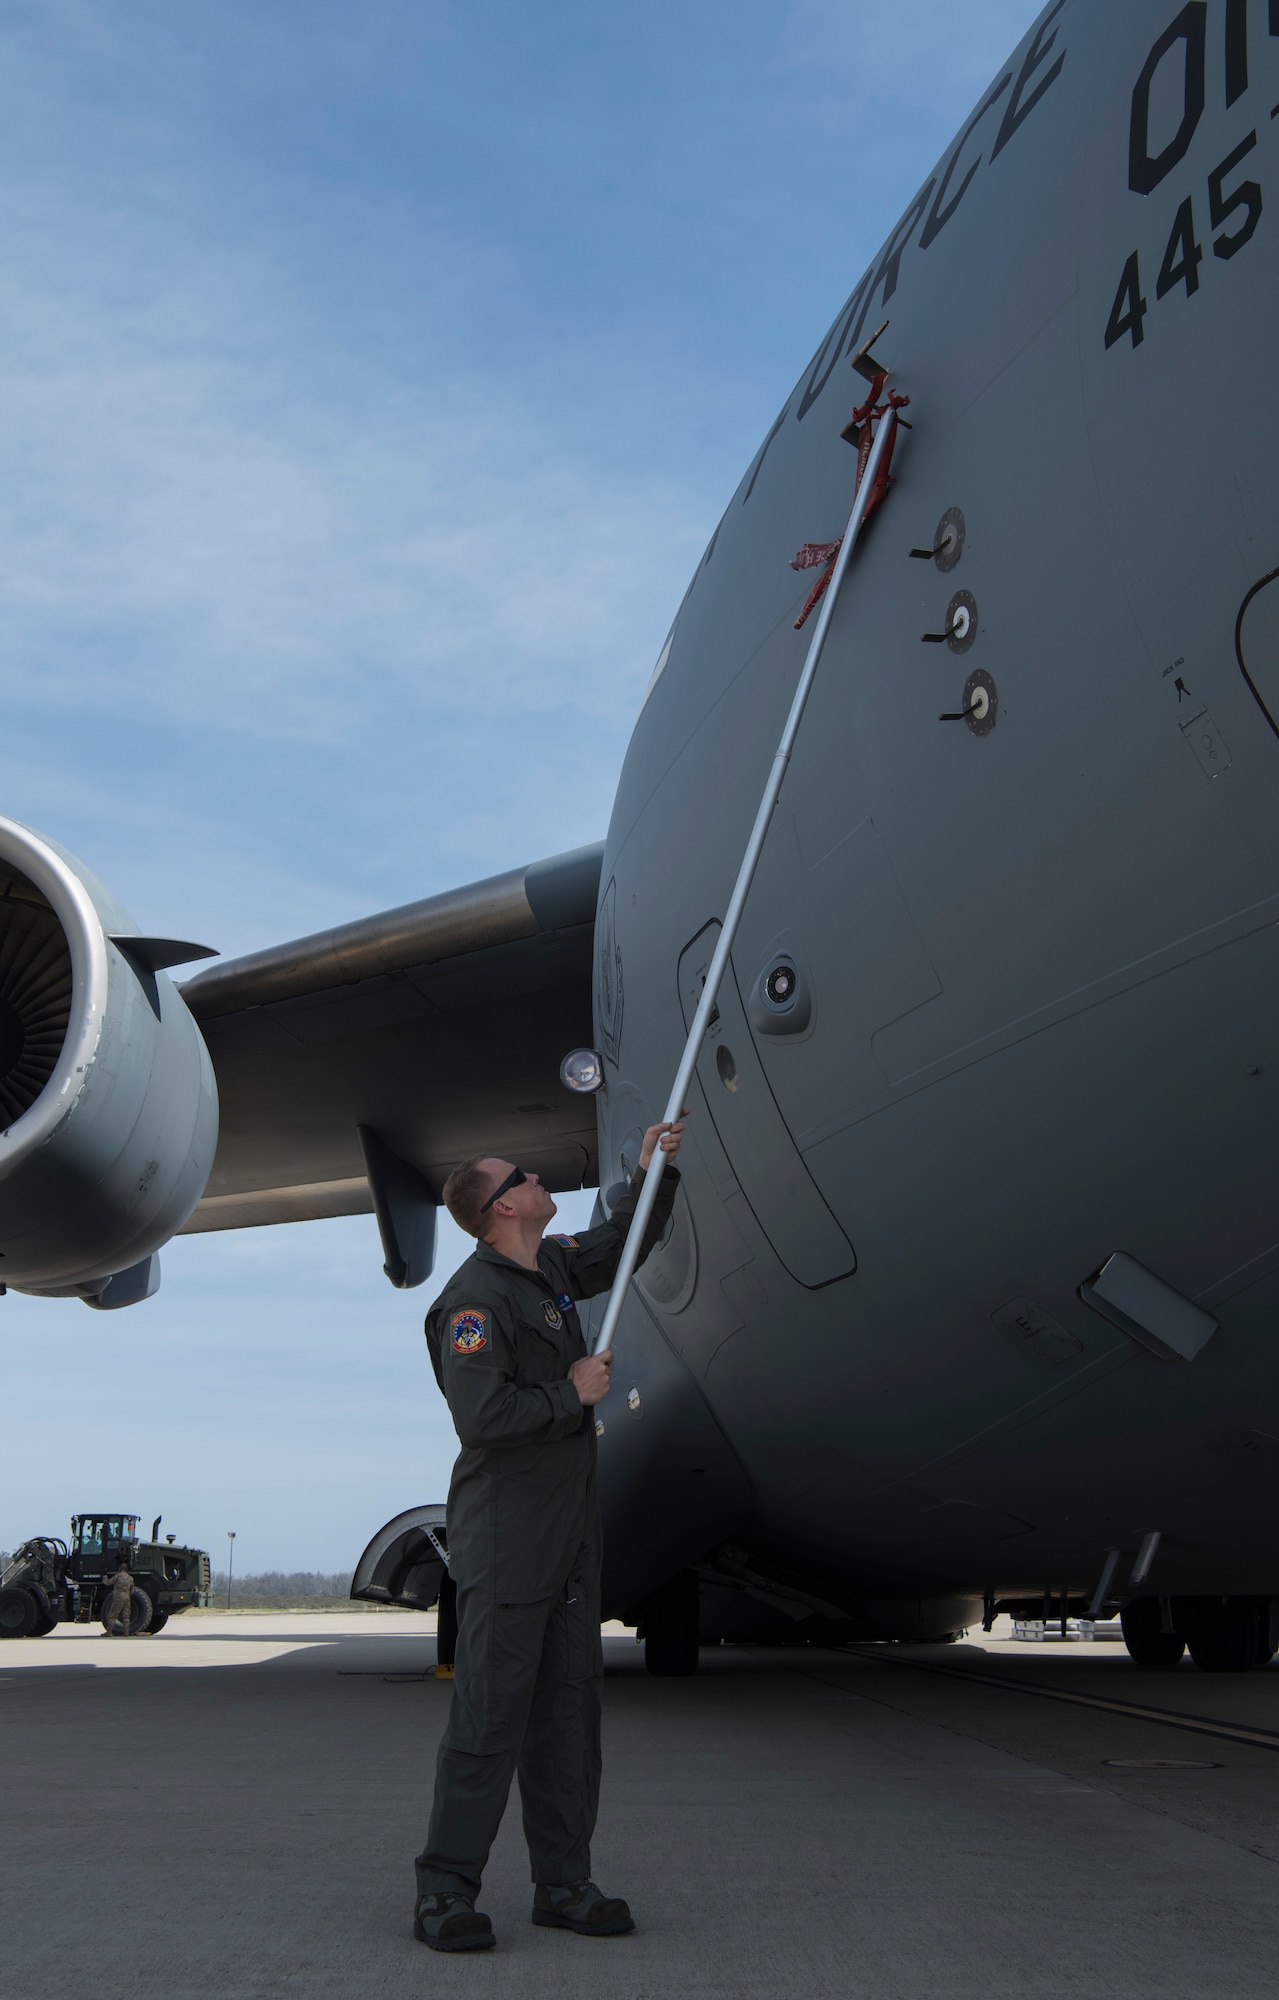 Tech. Sgt. Michael Mahaney, 445th Aircraft Maintenance Squadron hydraulic chief, removes pitot-static covers from a C-17 Globemaster III, assigned to Wright-Patterson Air Force Base, Ohio, during exercise Patriot Hook 2019, April 11, 2019, at Vandenberg Air Force Base, Calif. A pitot-static system is a pressure-sensitive instruments that is used in aviation to determine an aircraft's airspeed, altitude and altitude trend. The aircraft was required as the members simulated the real-world contingency exercise. (U.S. Air Force photo by Airman 1st Class Aubree Milks)